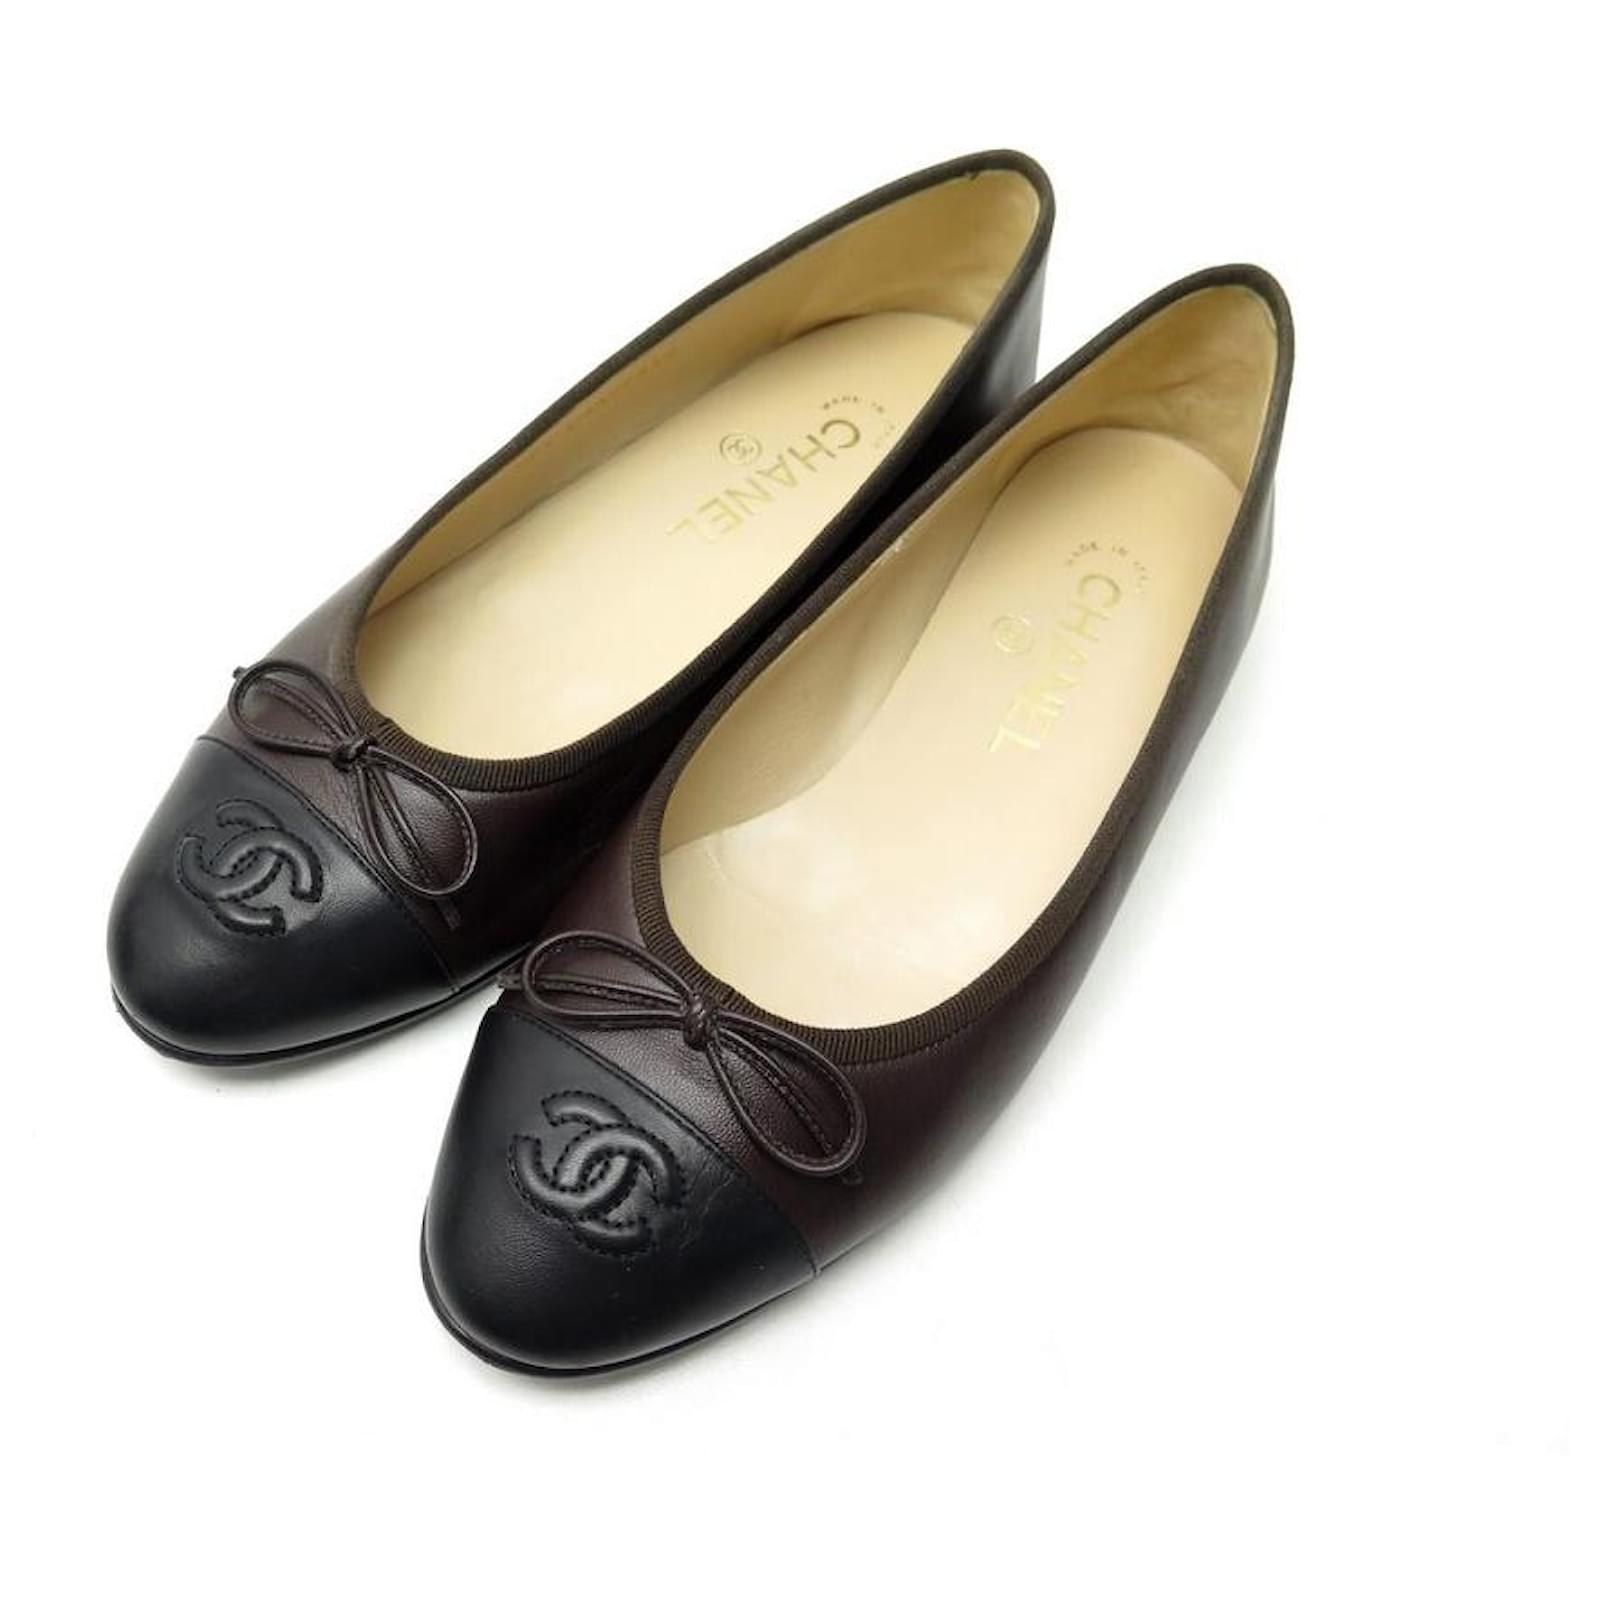 NEW CHANEL BALLERINA CC A LOGO SHOES02819 38.5 BROWN LEATHER BOX